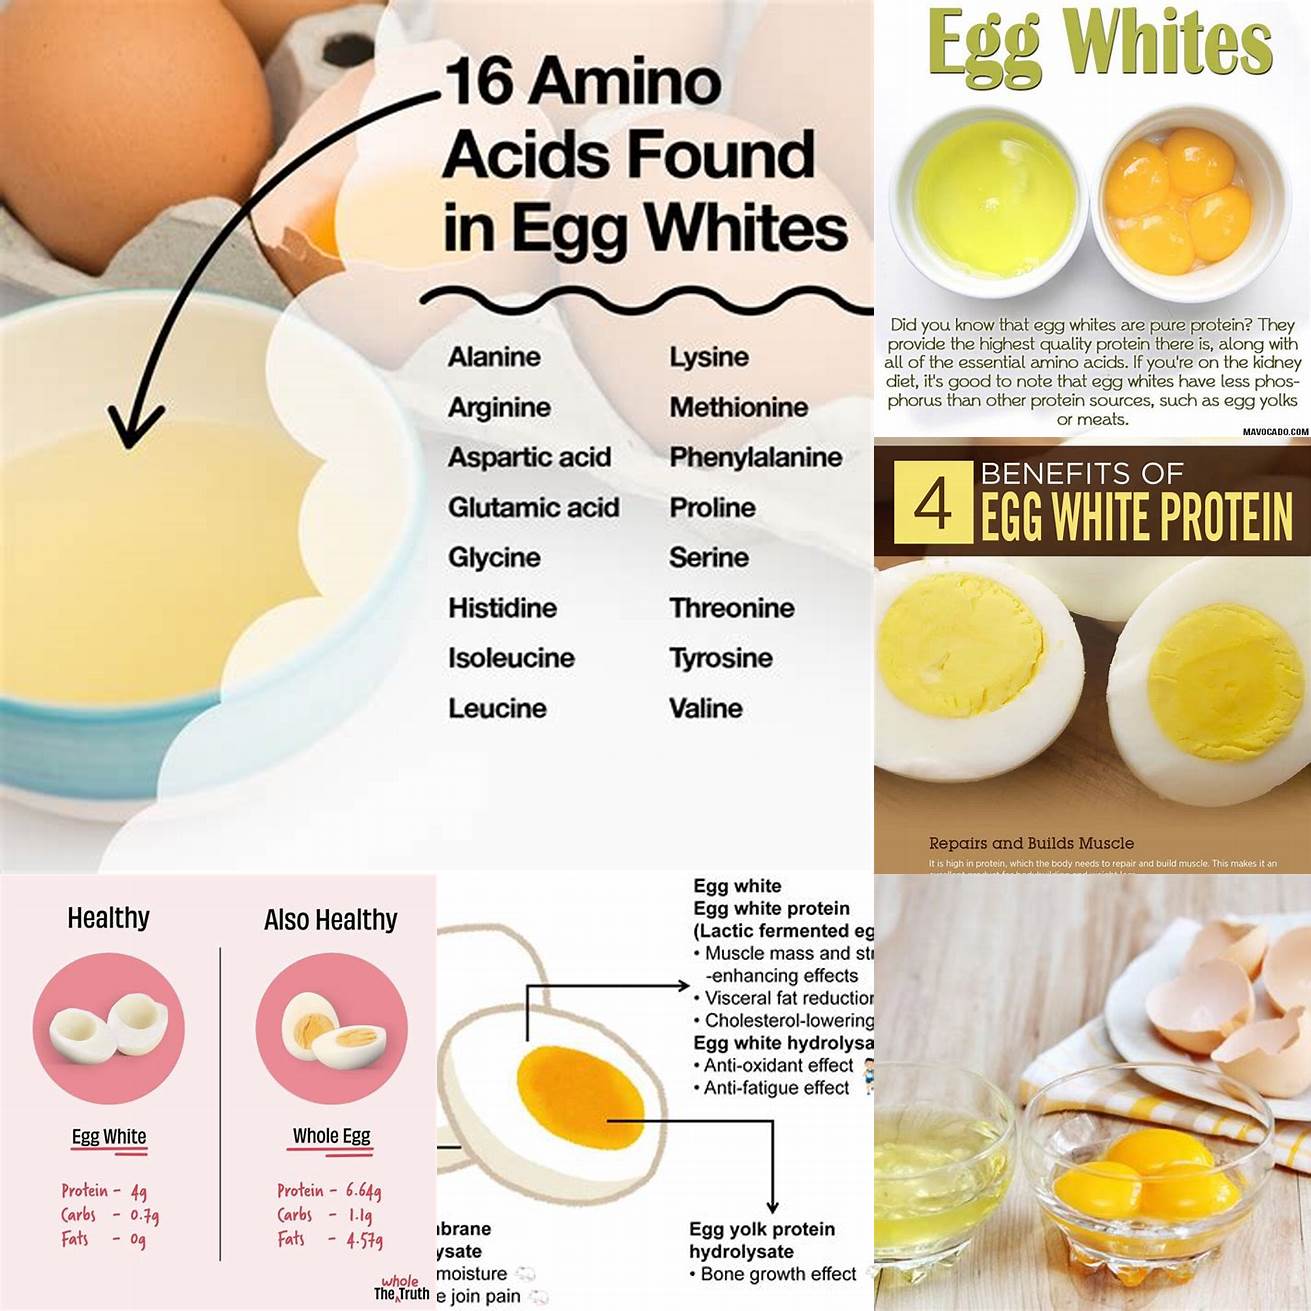 Egg whites are a good source of protein for cats which is essential for healthy muscles and tissues